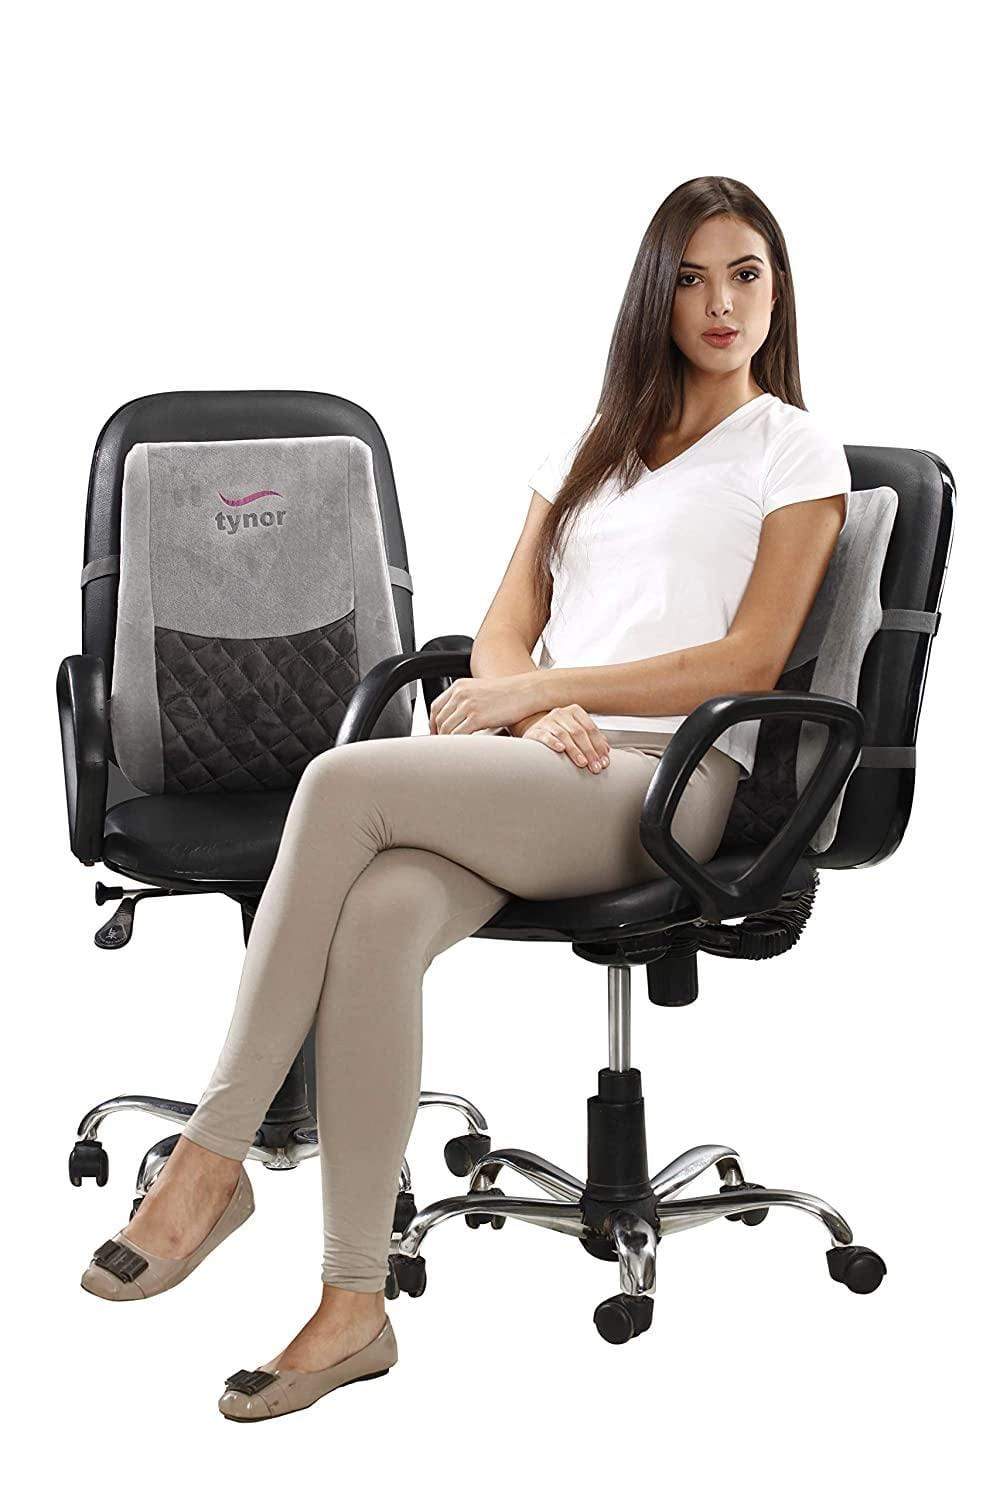 Tynor Back Rest Full I-46-Health & Personal Care-dealsplant